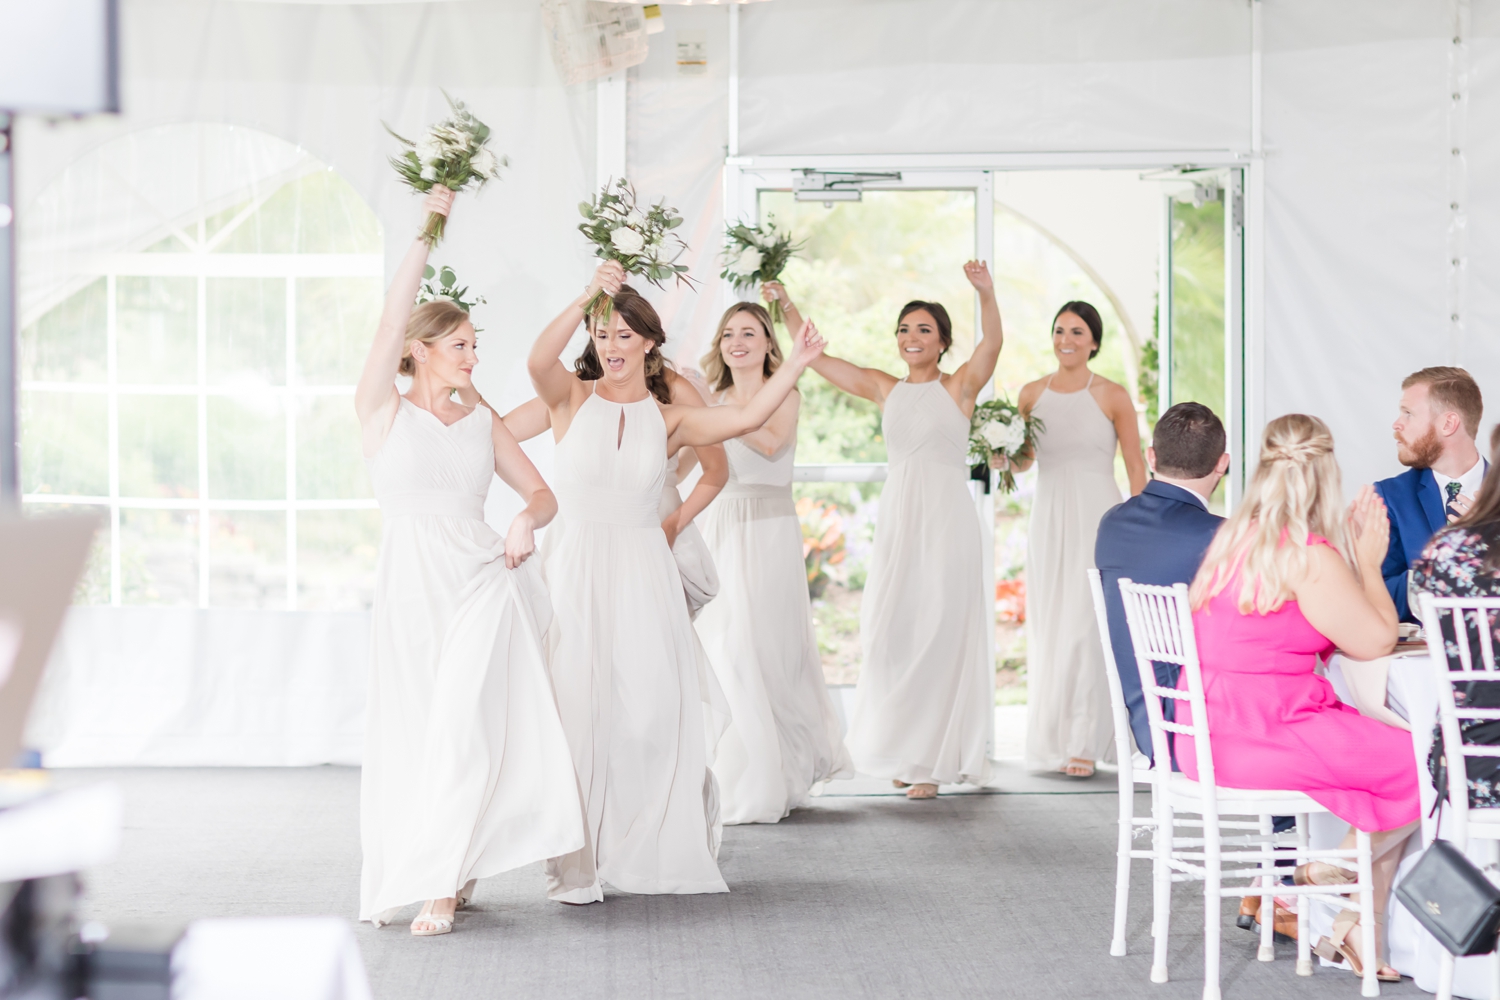  Loved these fun bridal party entrances!  